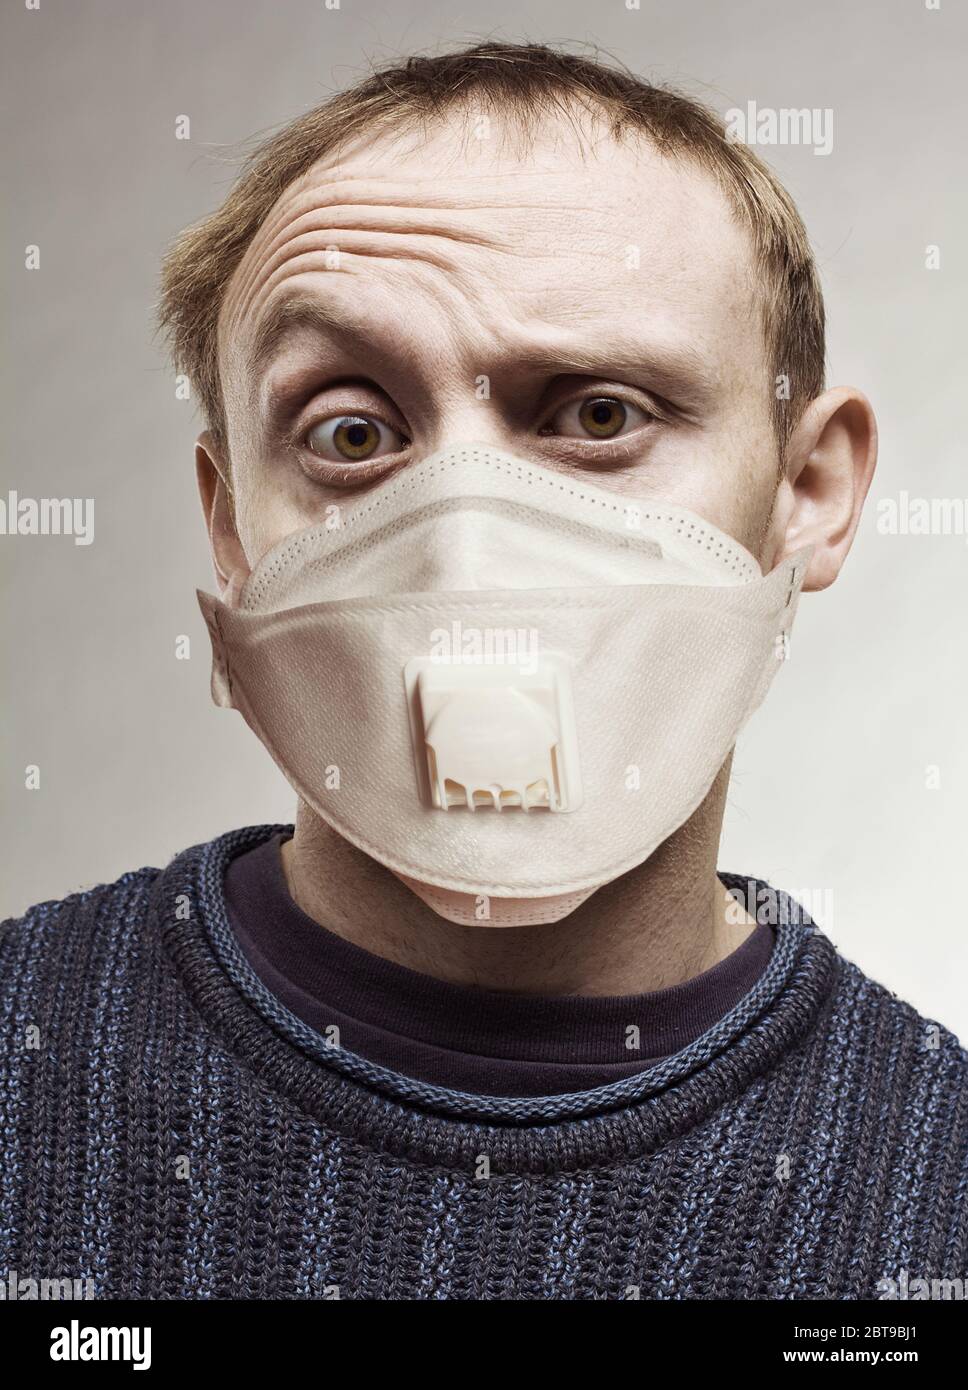 Surprised man in protective mask portrait Stock Photo